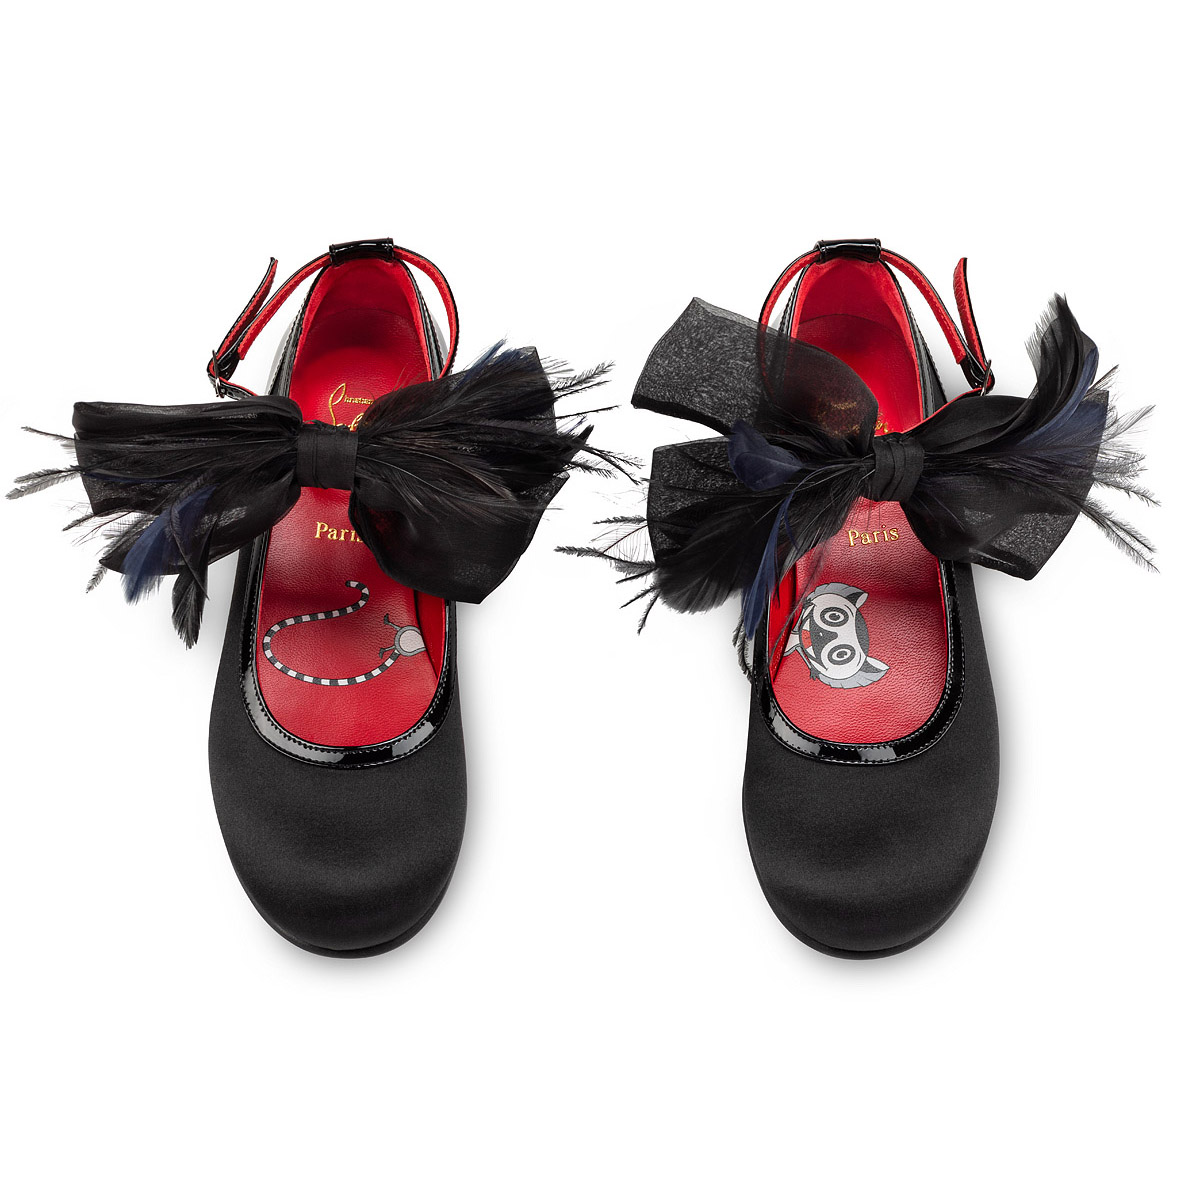 louboutin flats Archives - bishop&holland